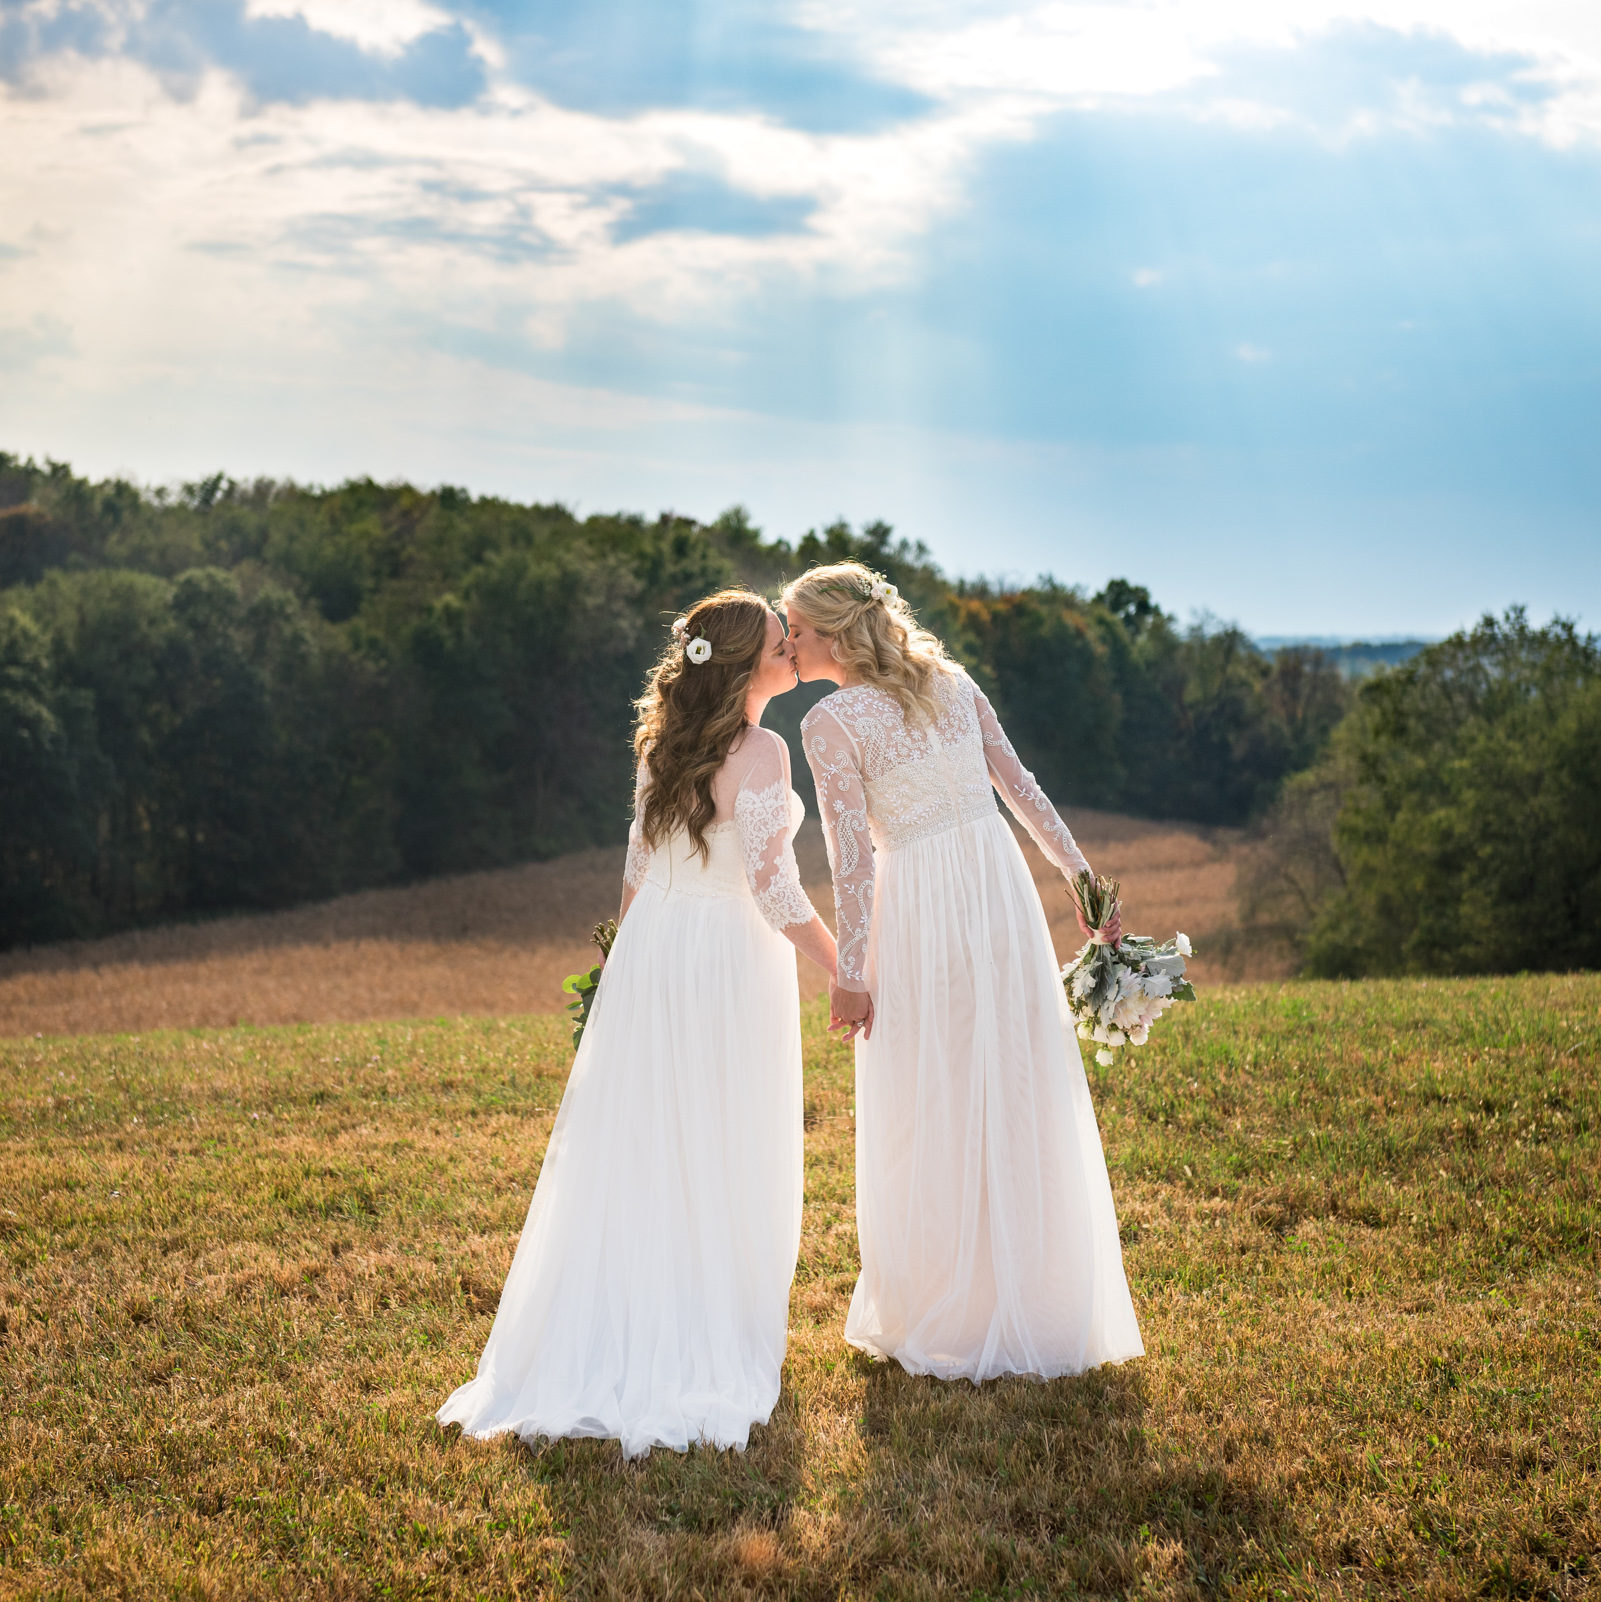 Two brides kissing on hilltop during same-sex lesbian wedding in central Ohio.